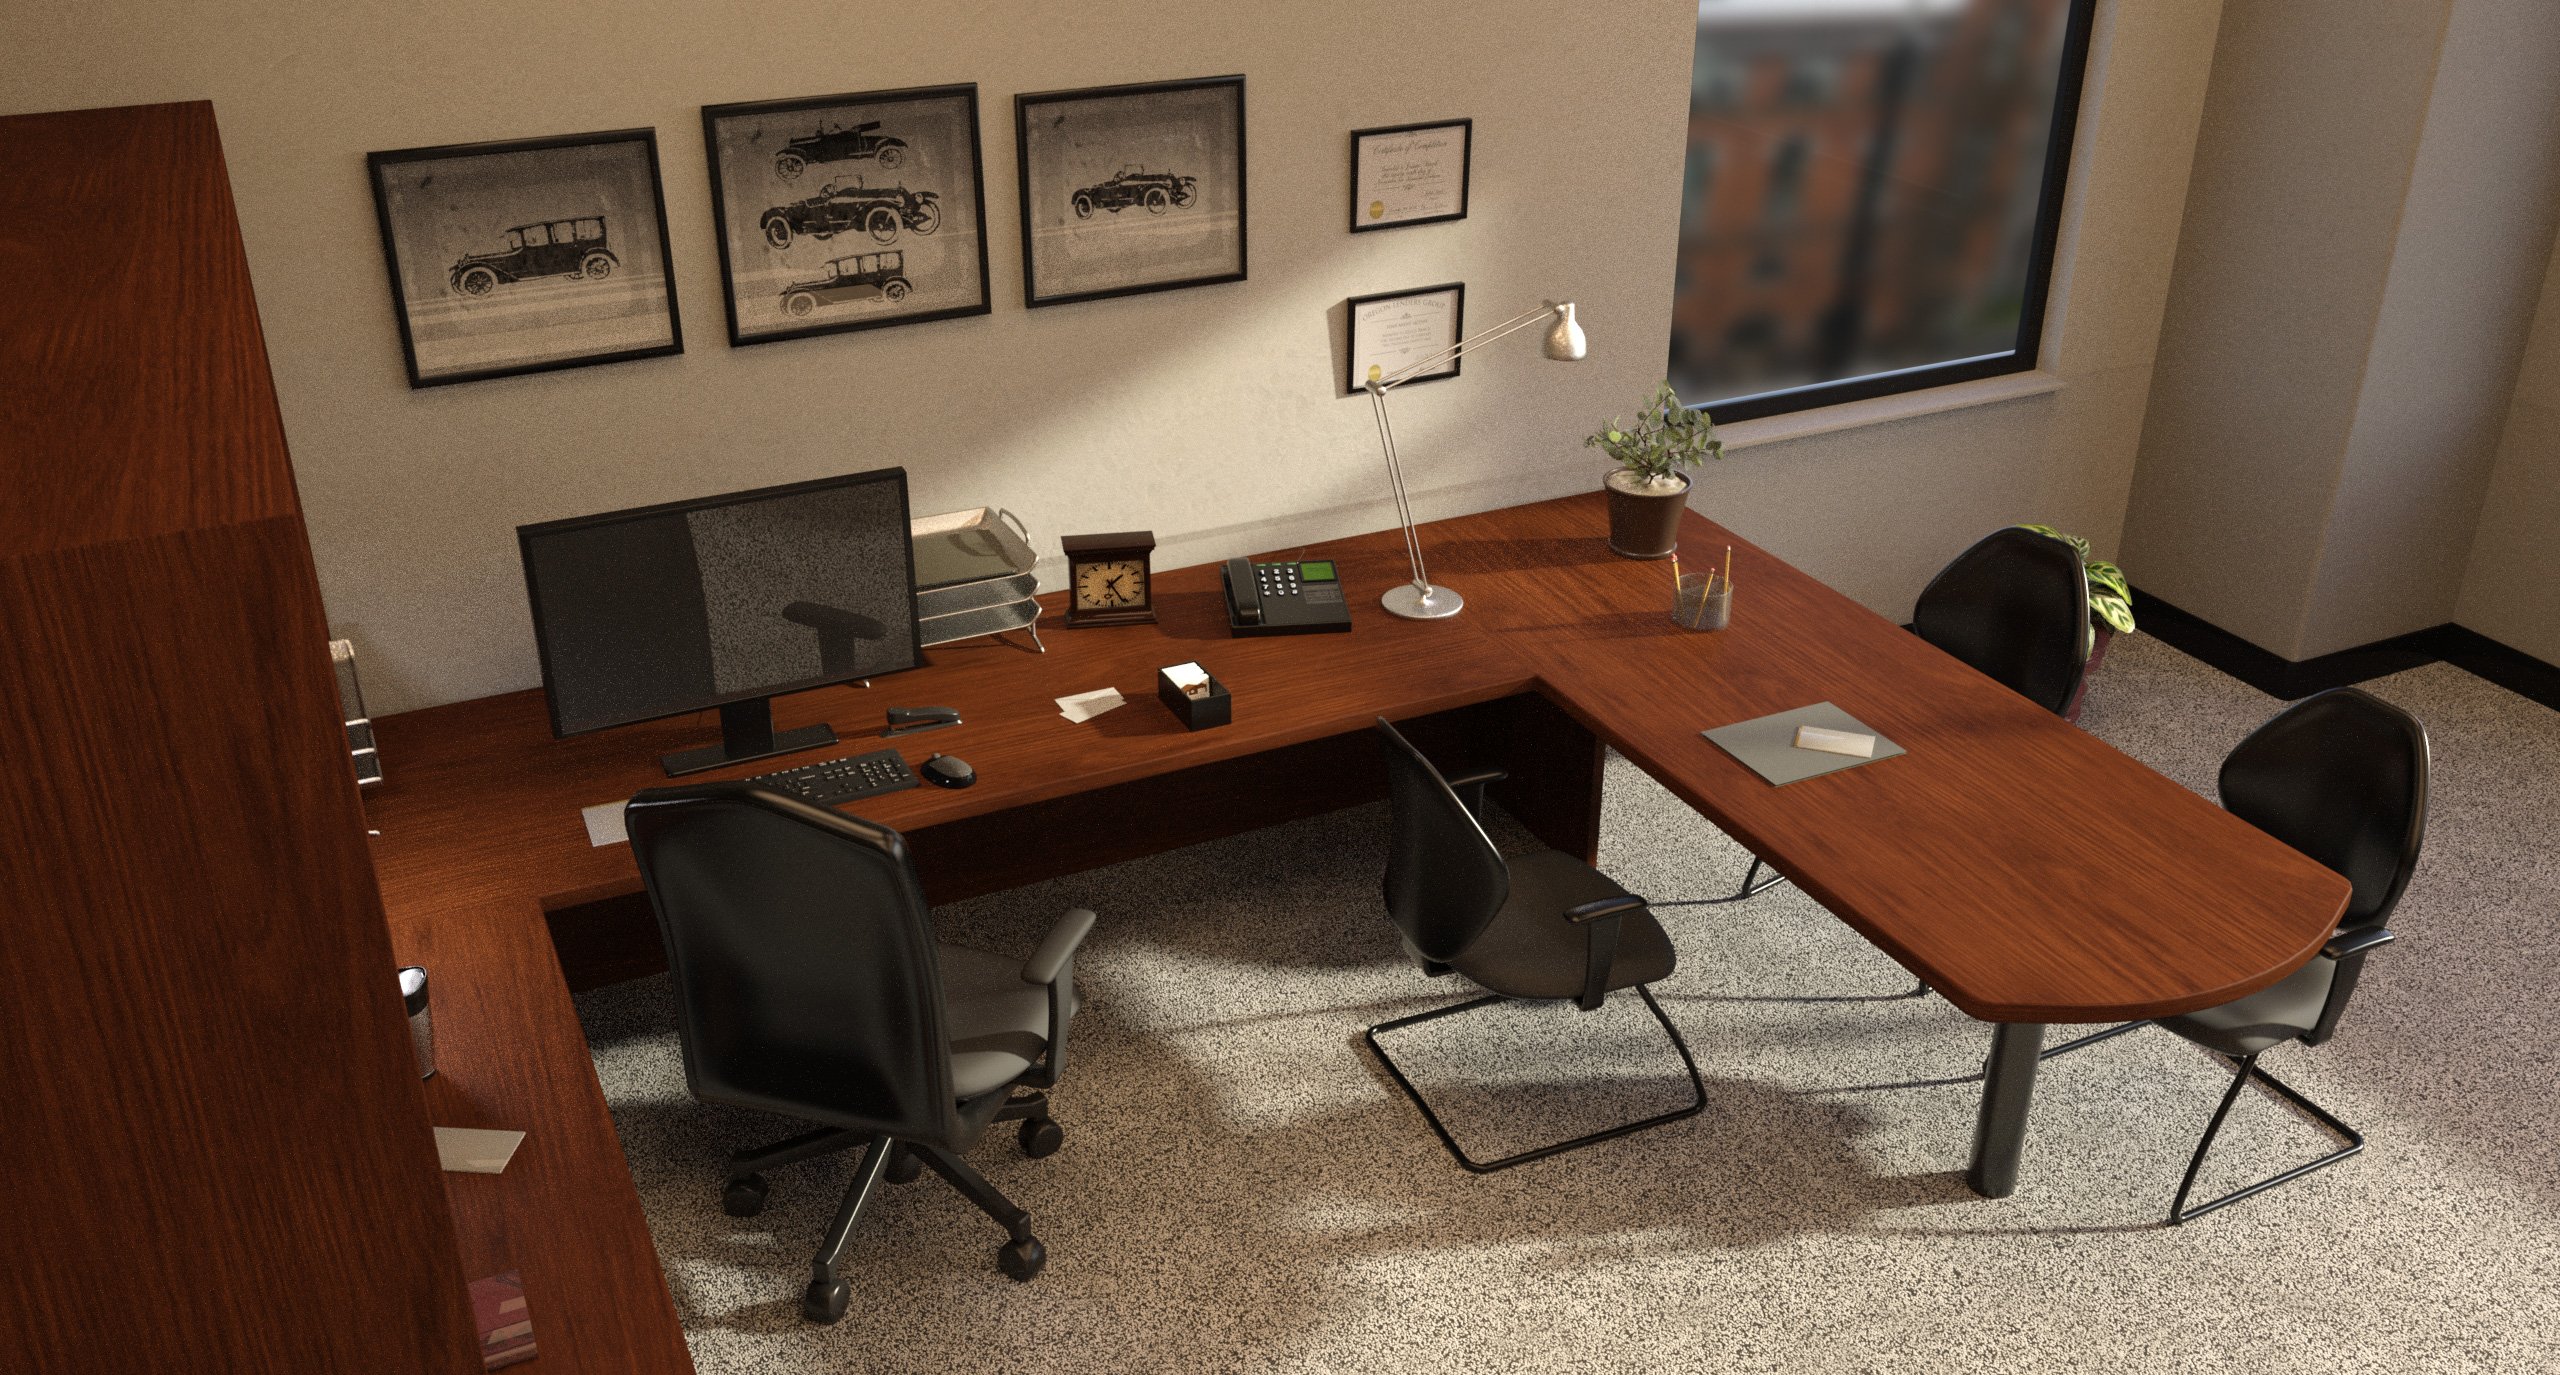 i13 Loan Agent's Office Interior by: ironman13, 3D Models by Daz 3D